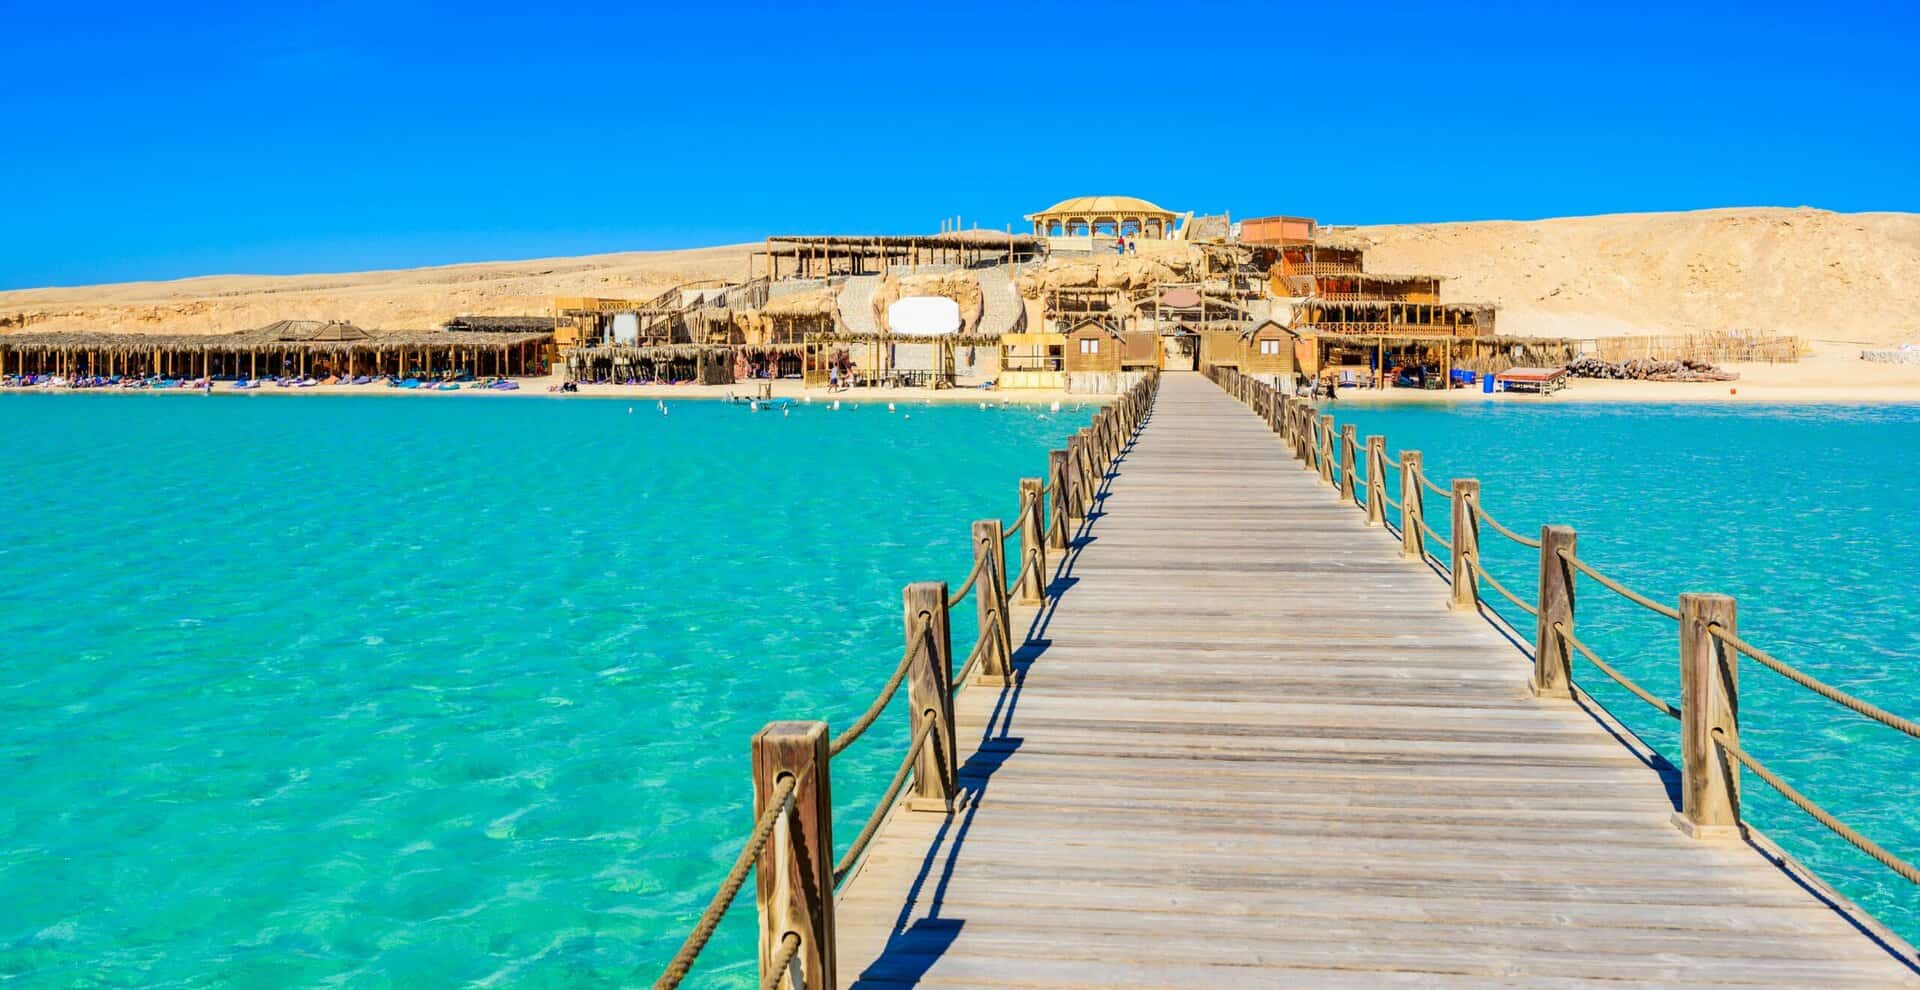 Giftun Island min scaled Hurghada is one of the important Egyptian tourist cities located on the coast of the Red Sea in the southwest of Egypt. It is also close to famous nearby cities like Ras Ghareb, Safaga, and the Red Sea Mountains. The weather in the city is warm throughout the year, which makes it perfect as a year-round destination.